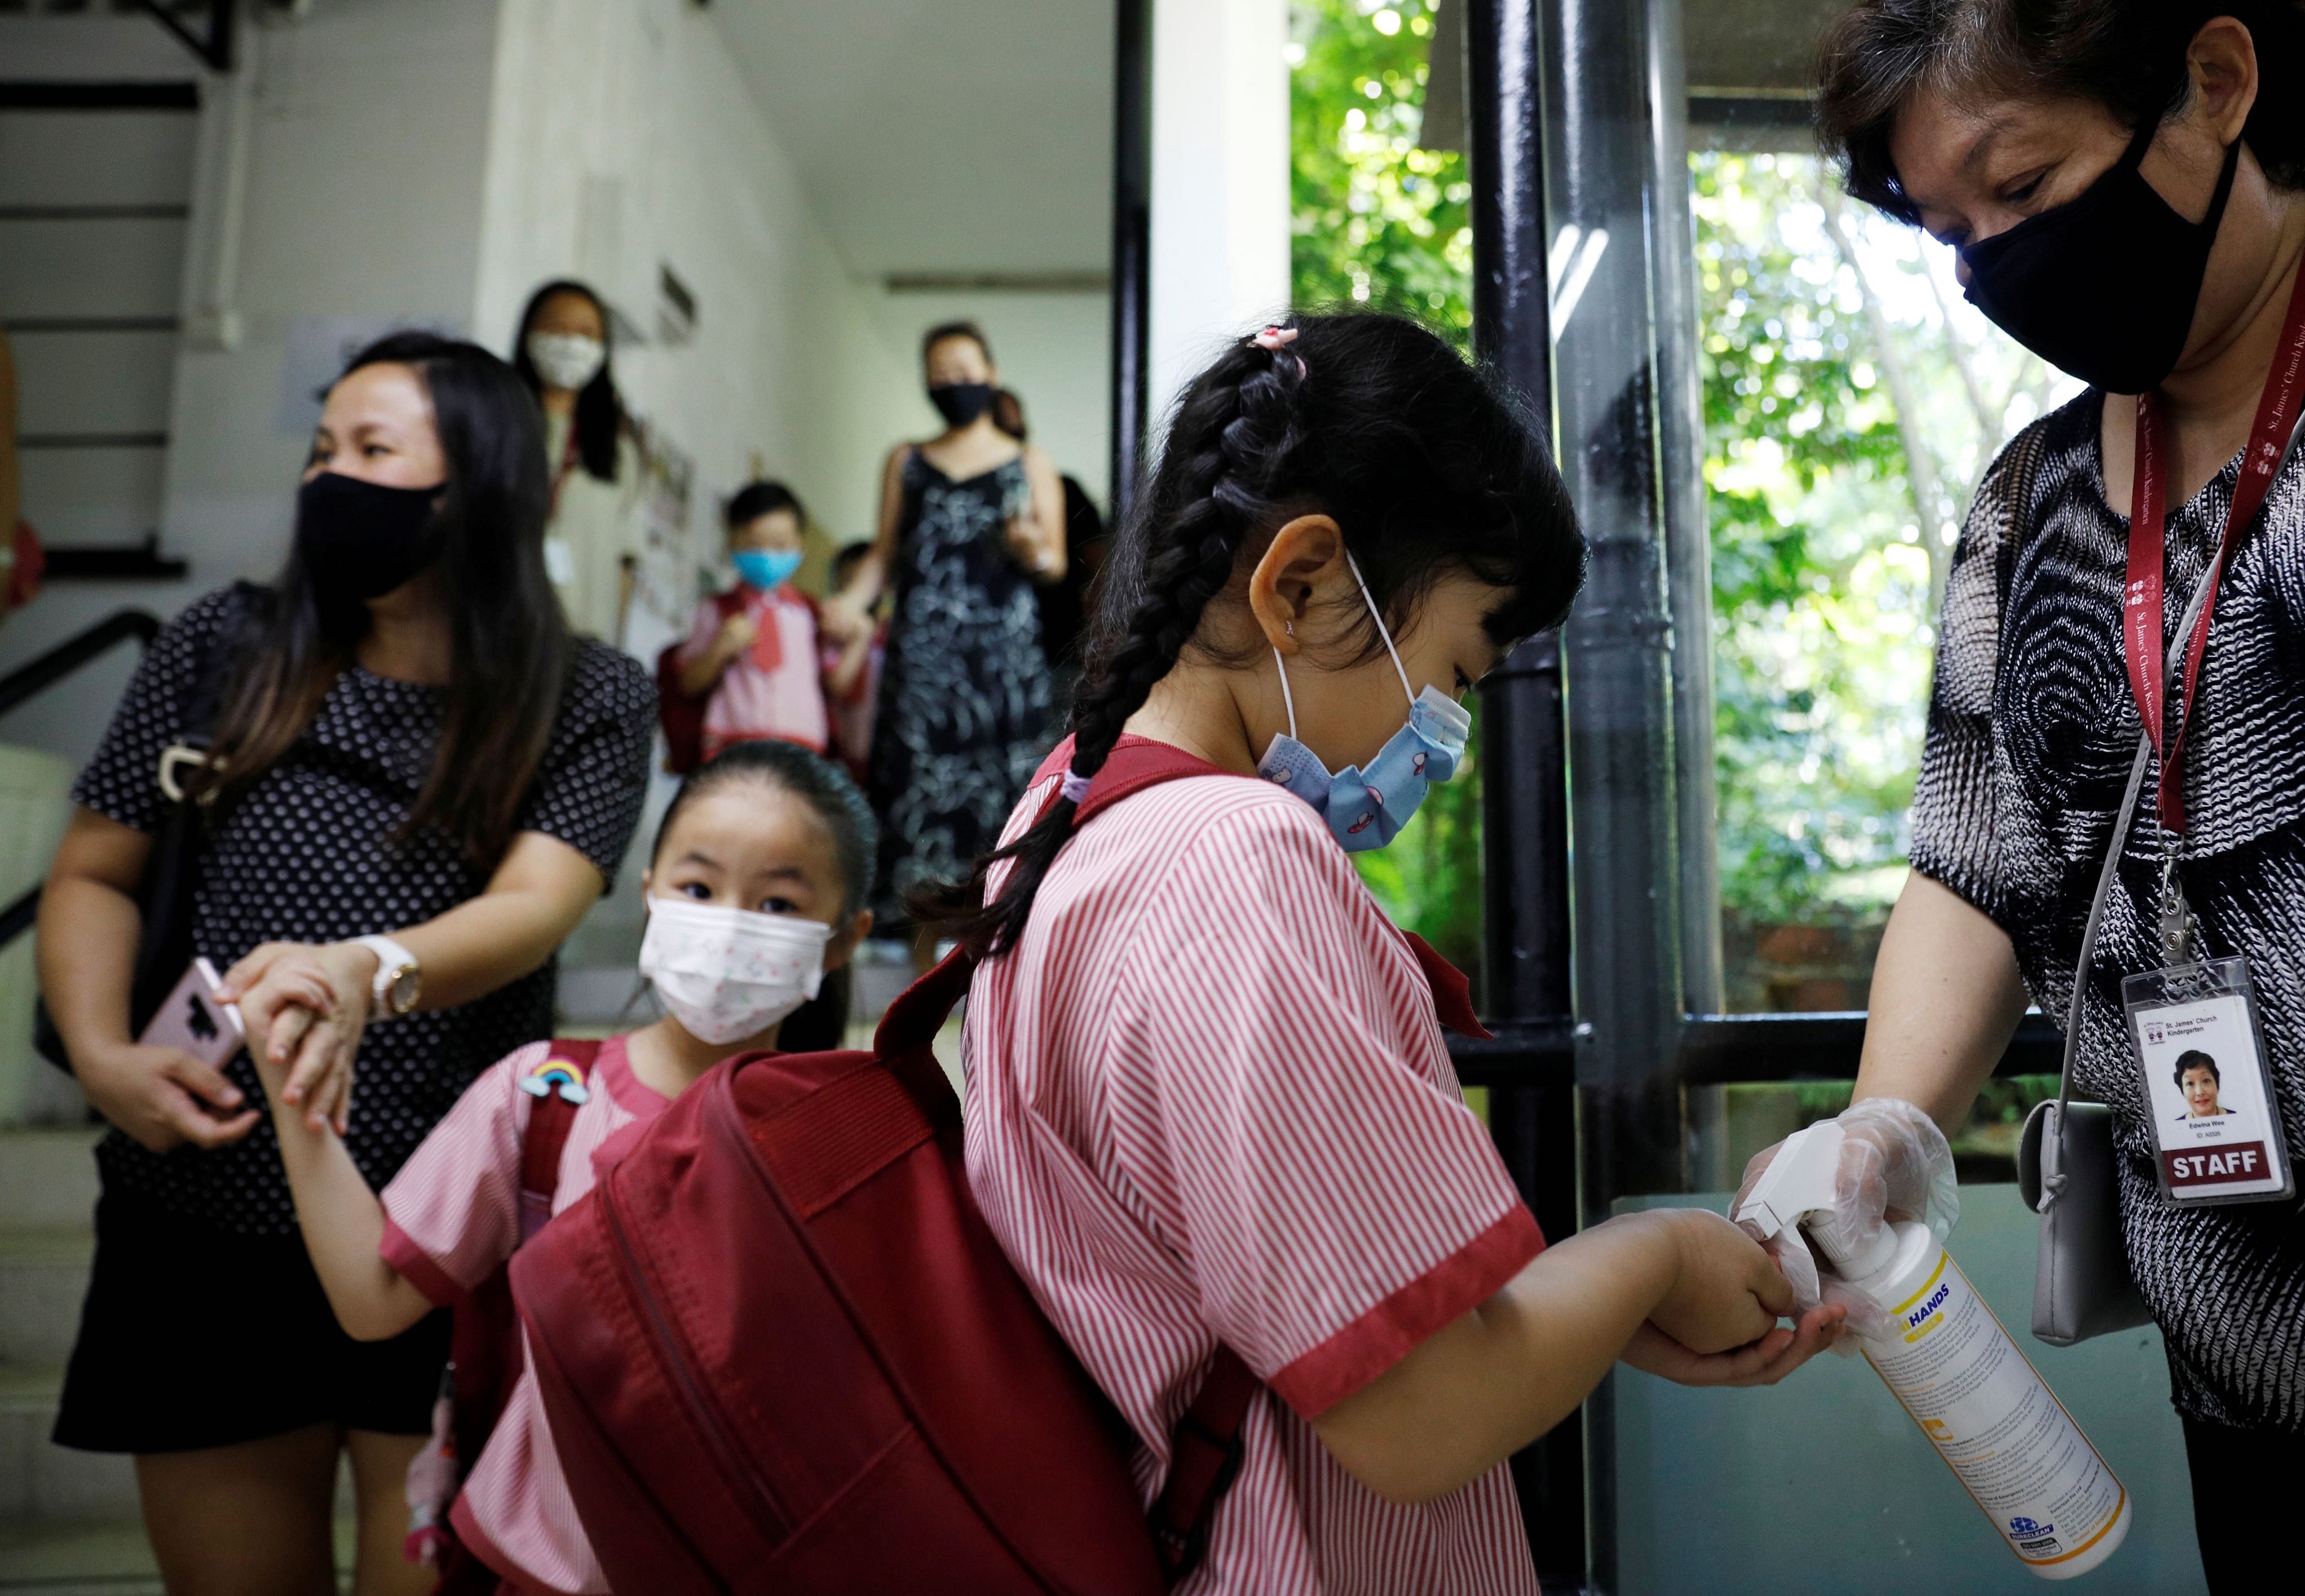 Children wearing protective face masks sanitise their hands as they attend preschool classes at St James' Church Kindergarten as schools reopen amid the coronavirus disease (COVID-19) outbreak in Singapore. Credit: Reuters photo